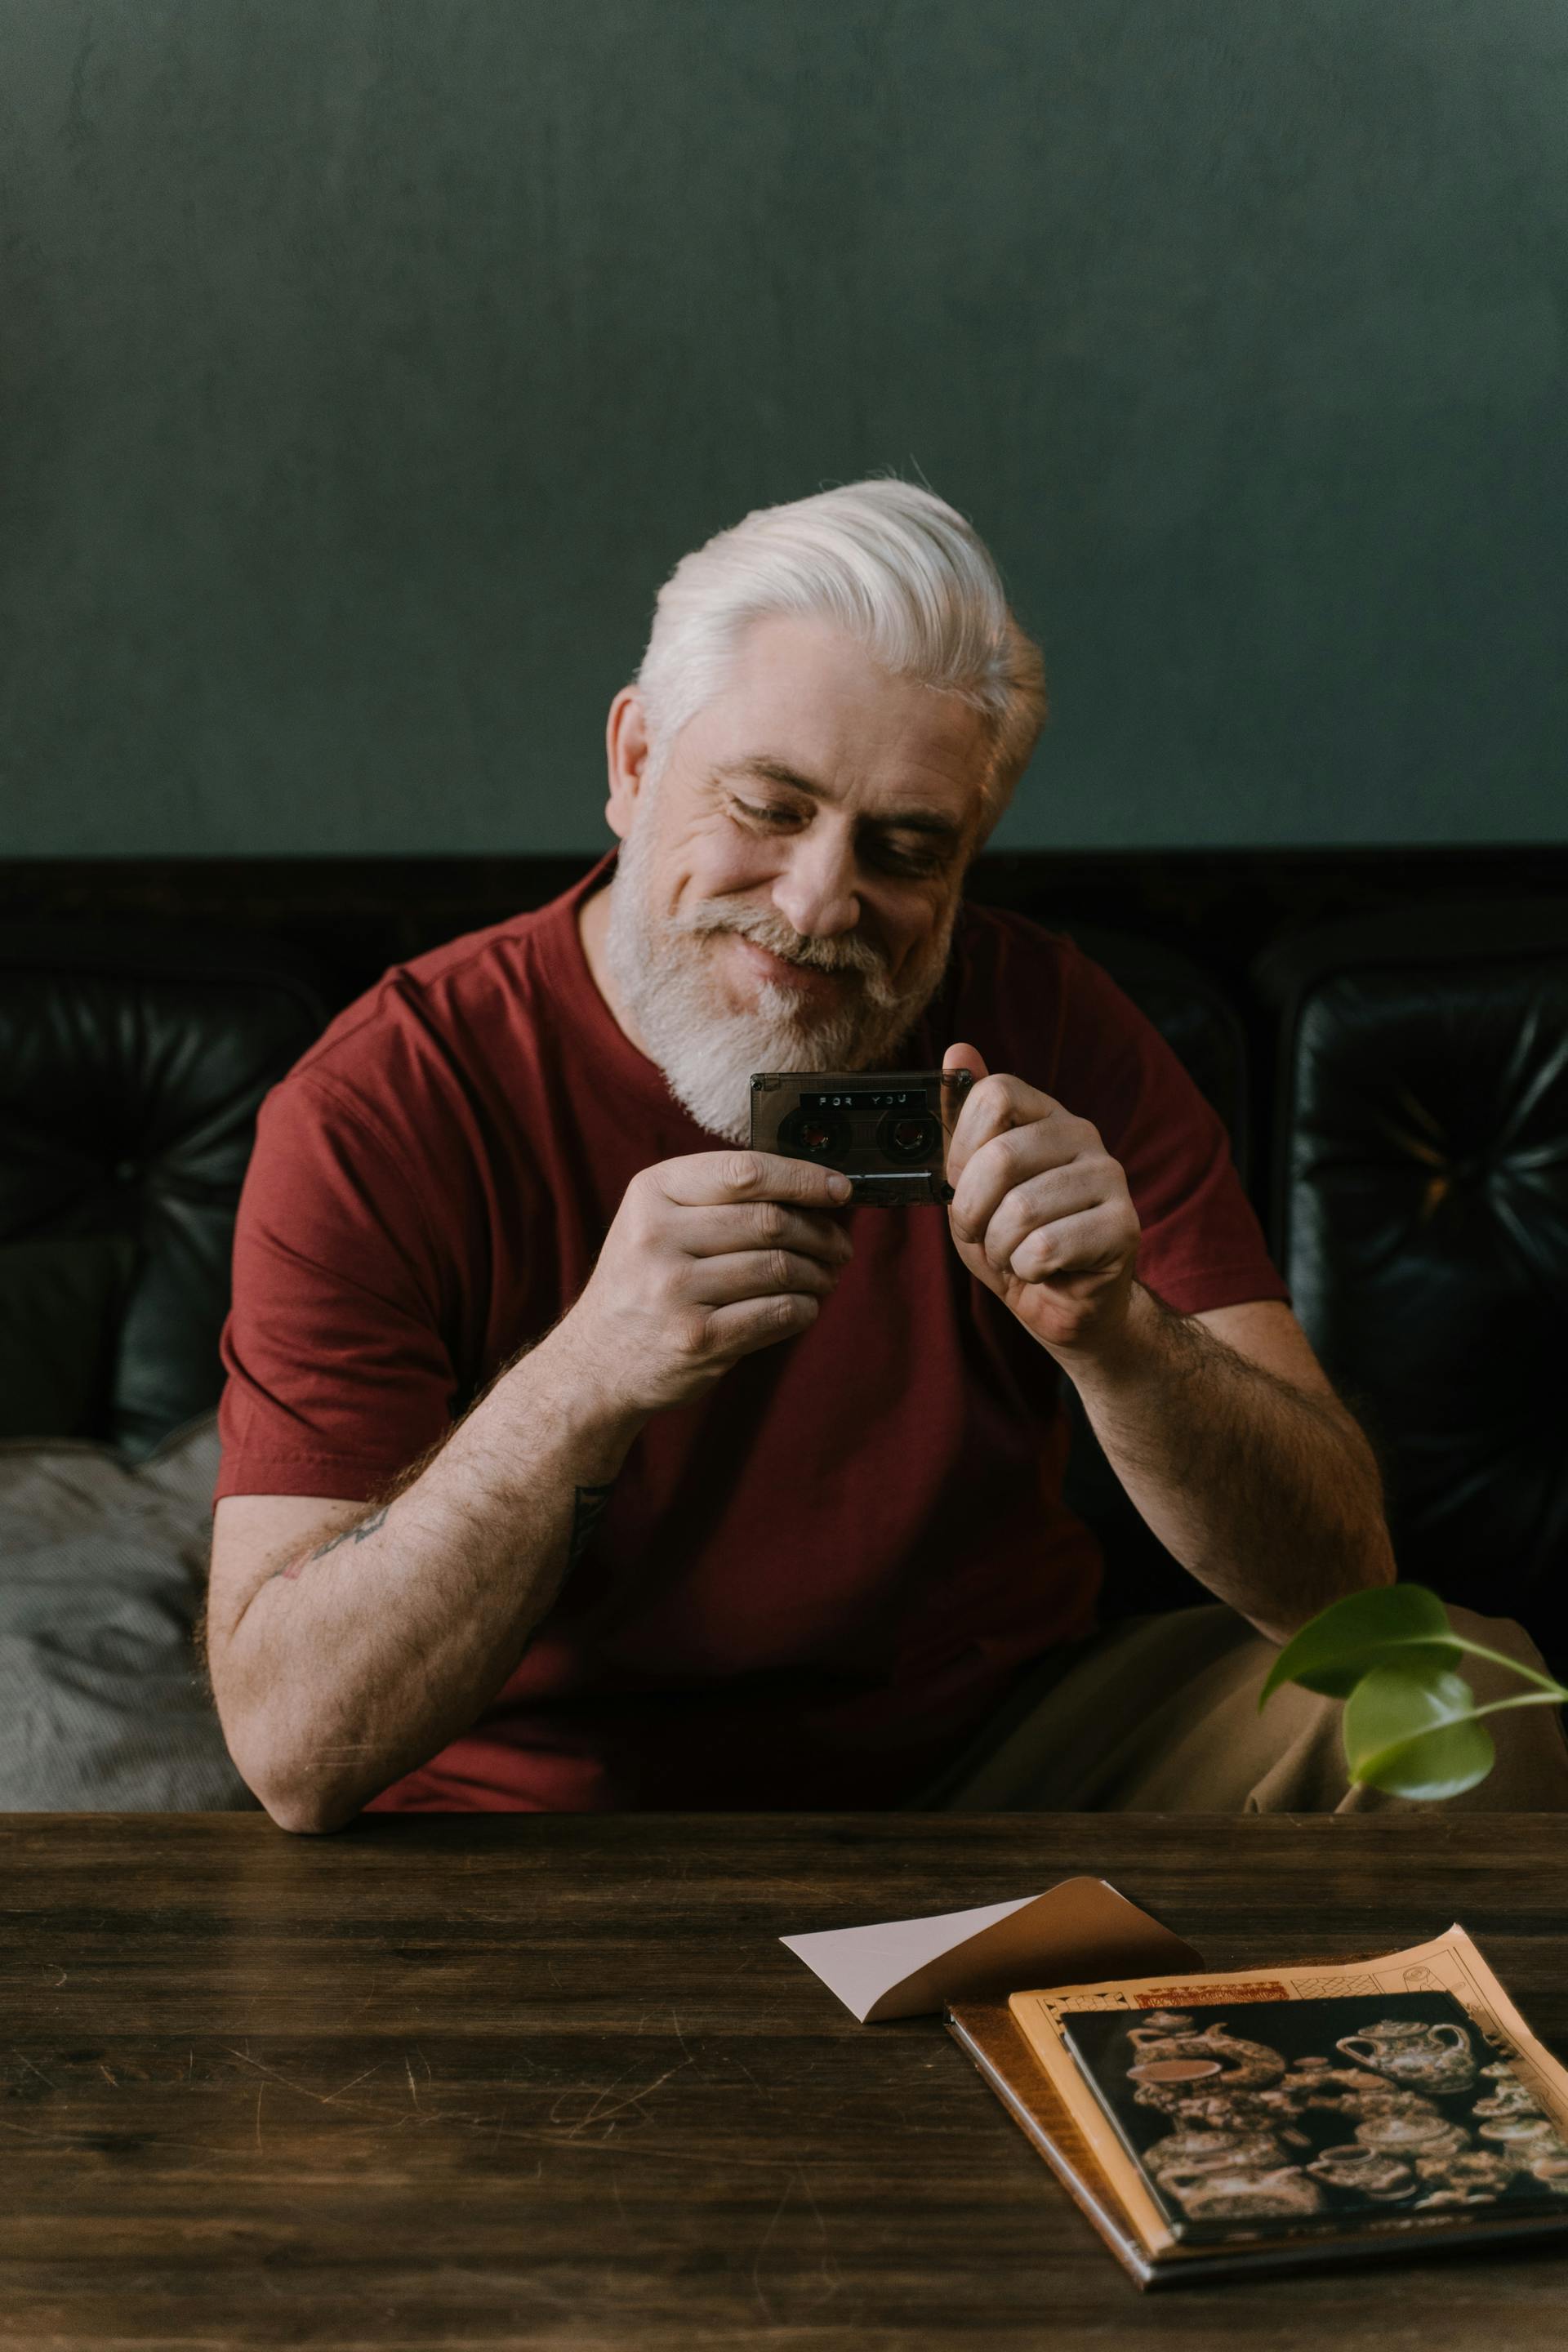 A smiling older man looking at a card | Source: Pexels